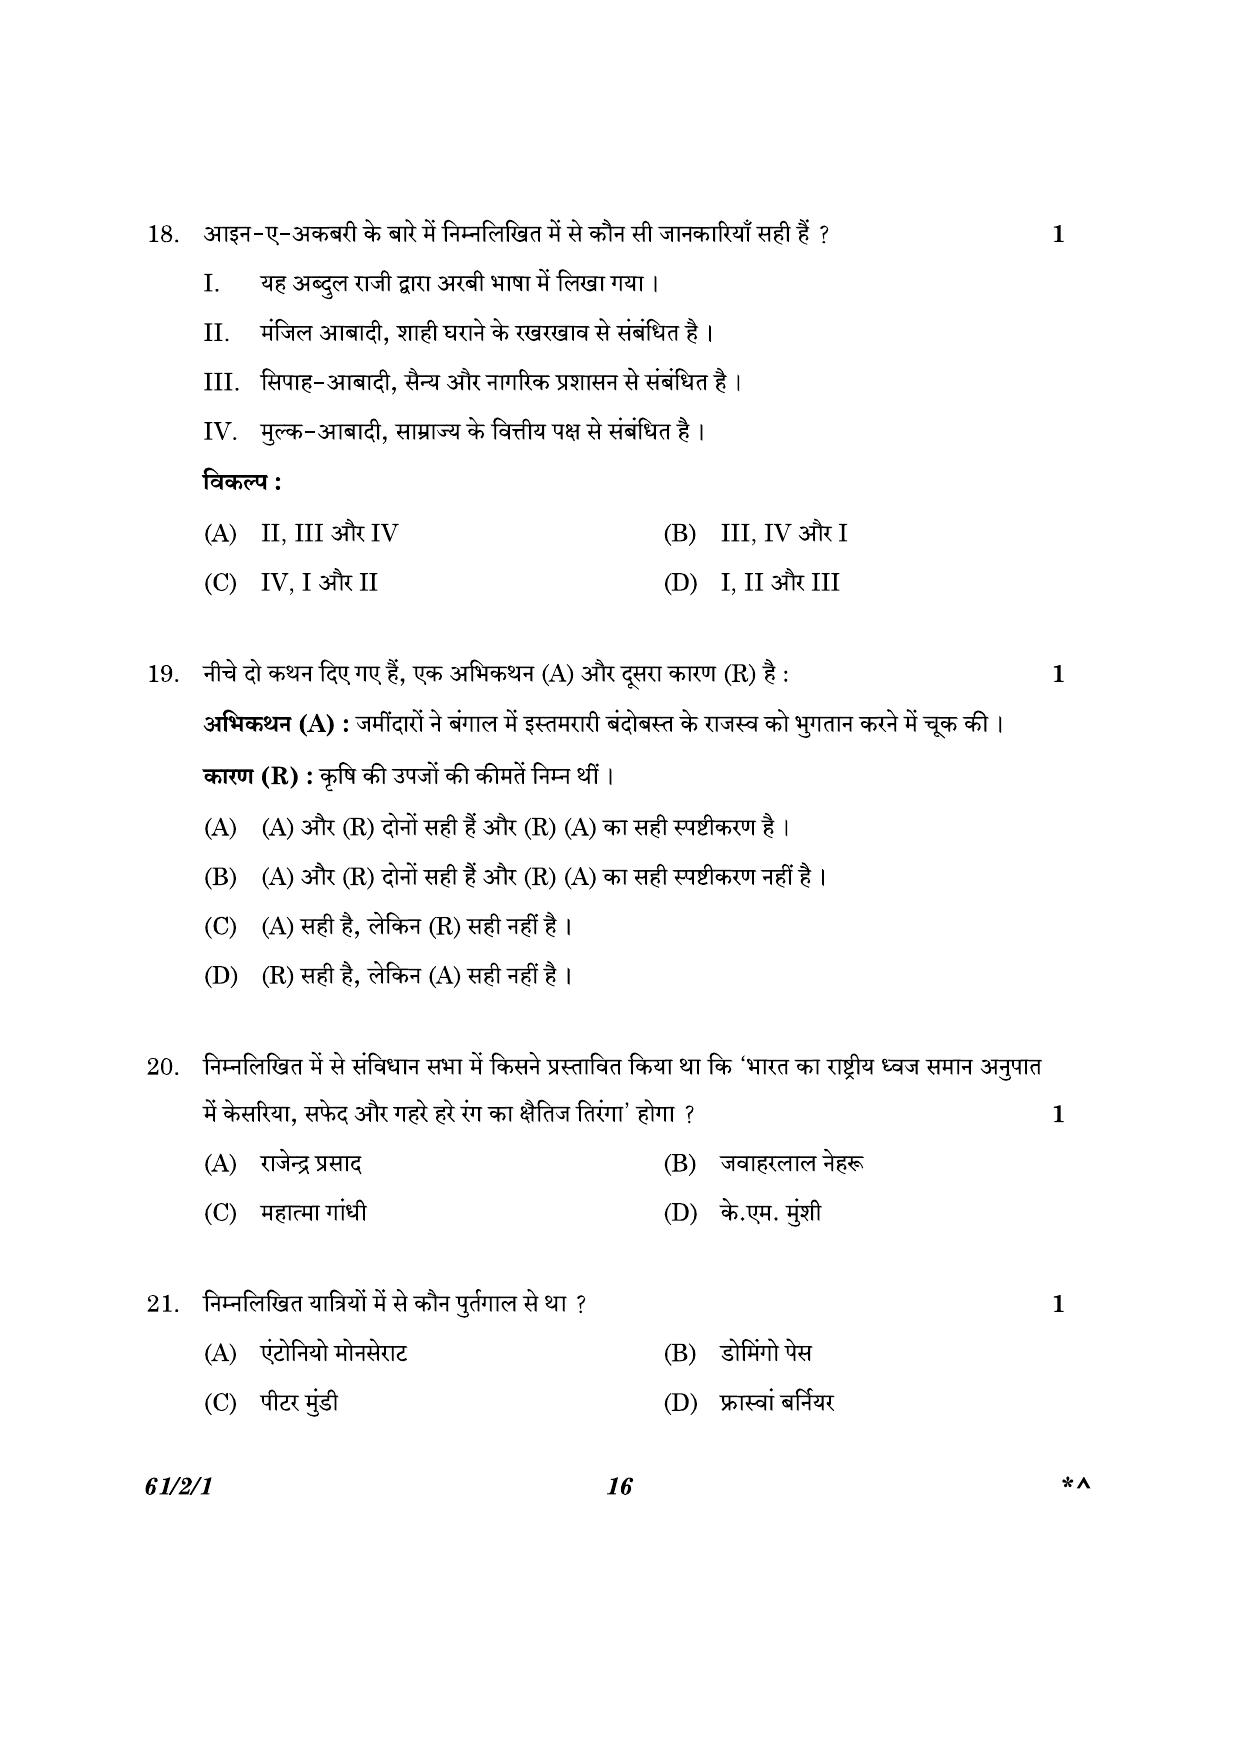 CBSE Class 12 61-2-1 History 2023 Question Paper - Page 16